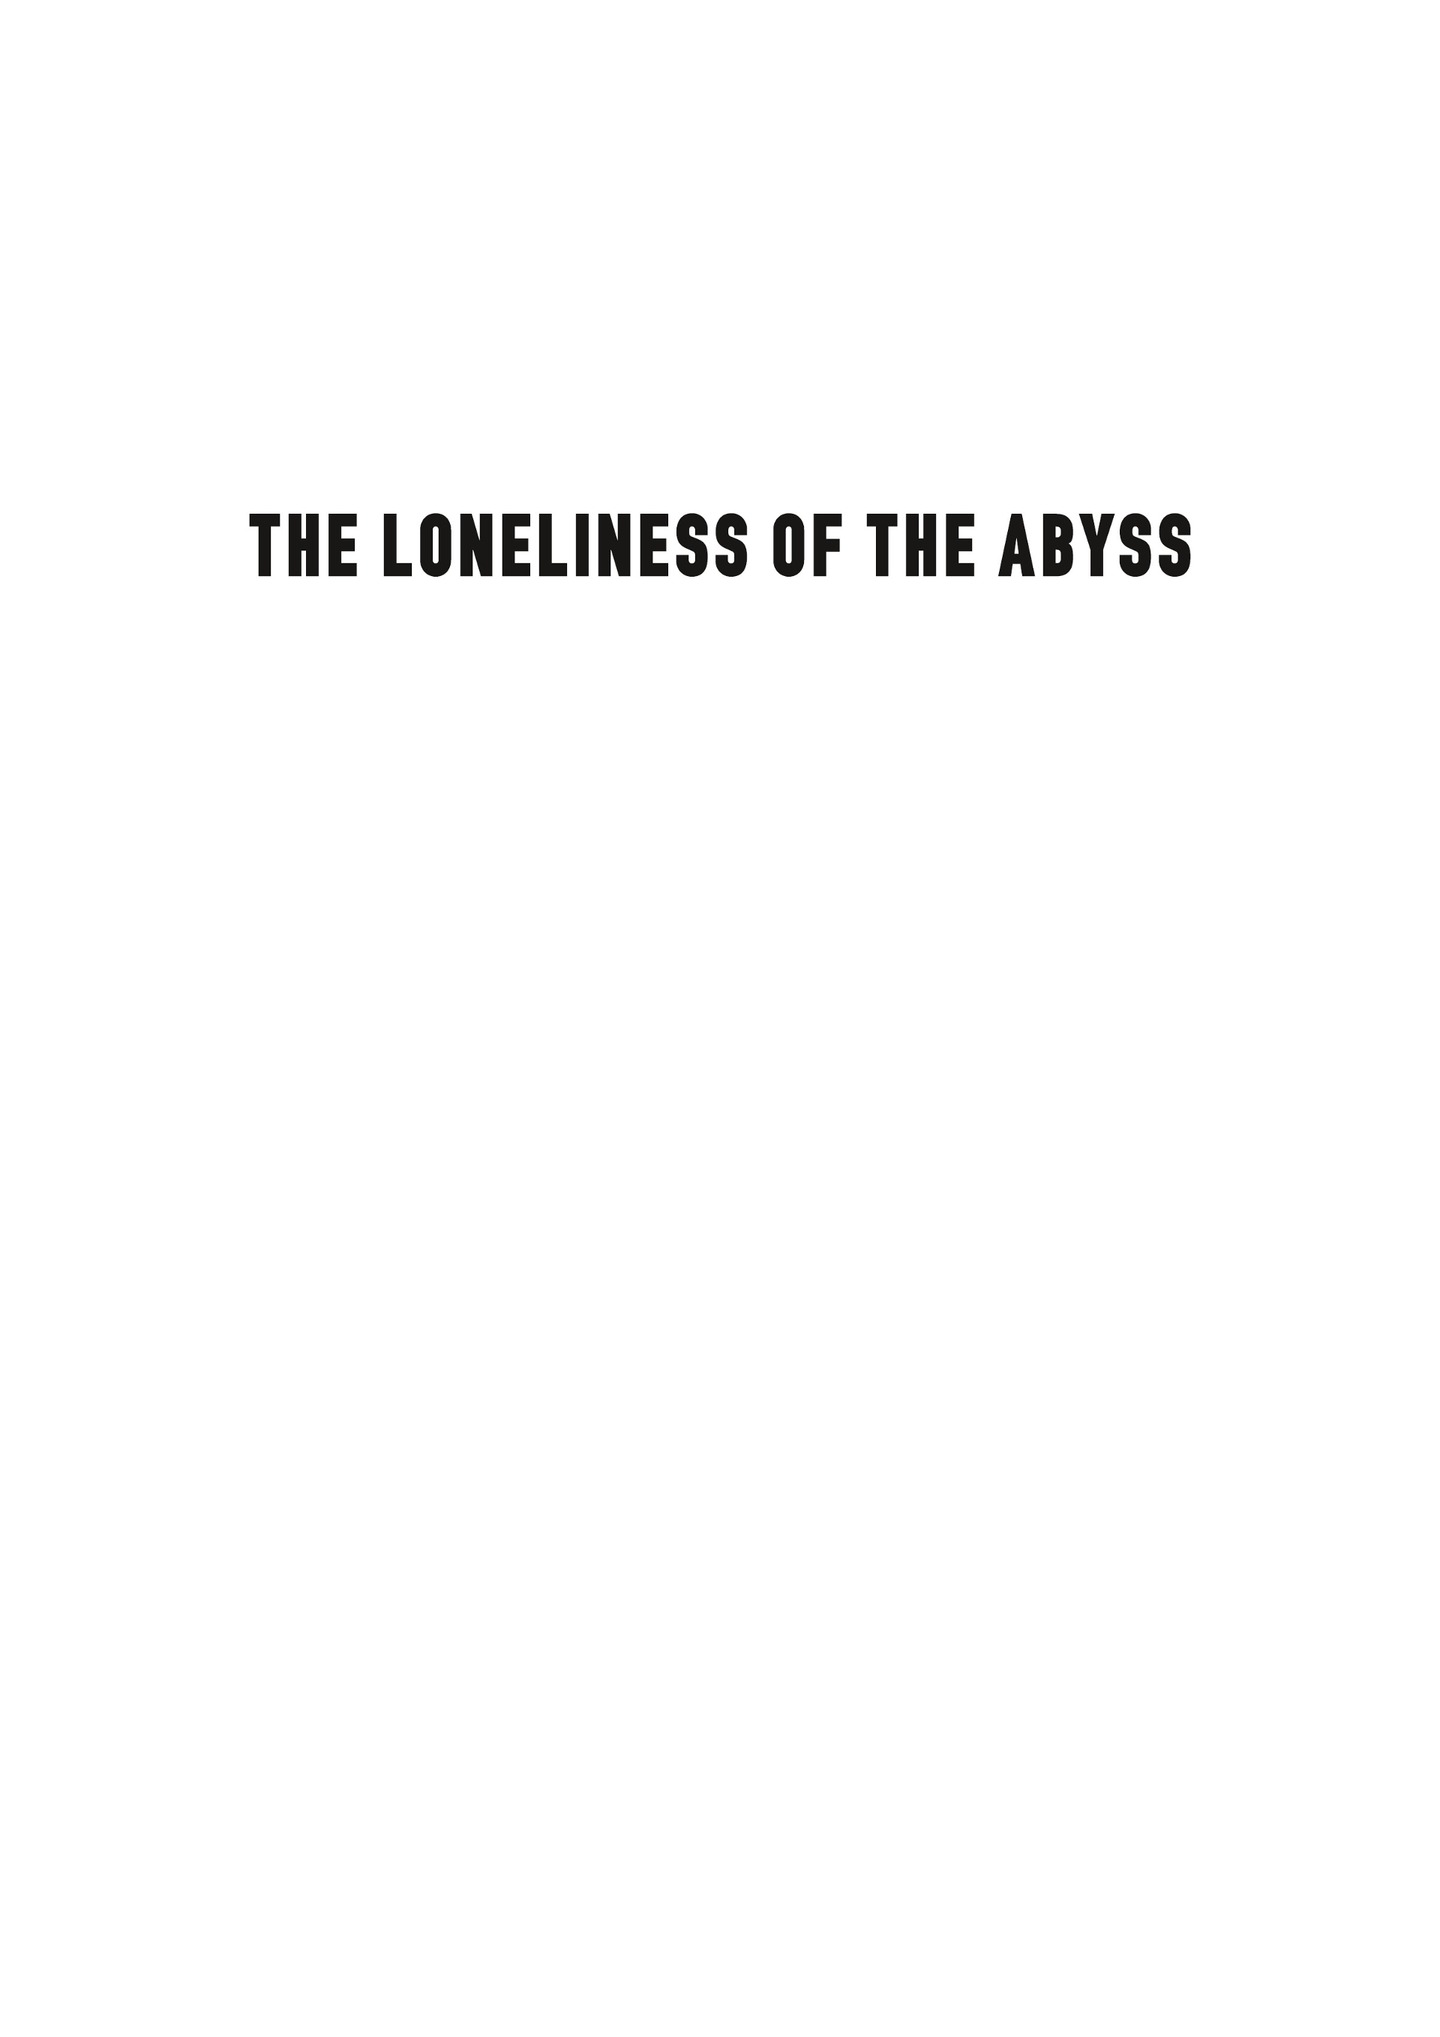 Read online The Loneliness of the Abyss comic -  Issue # TPB - 4